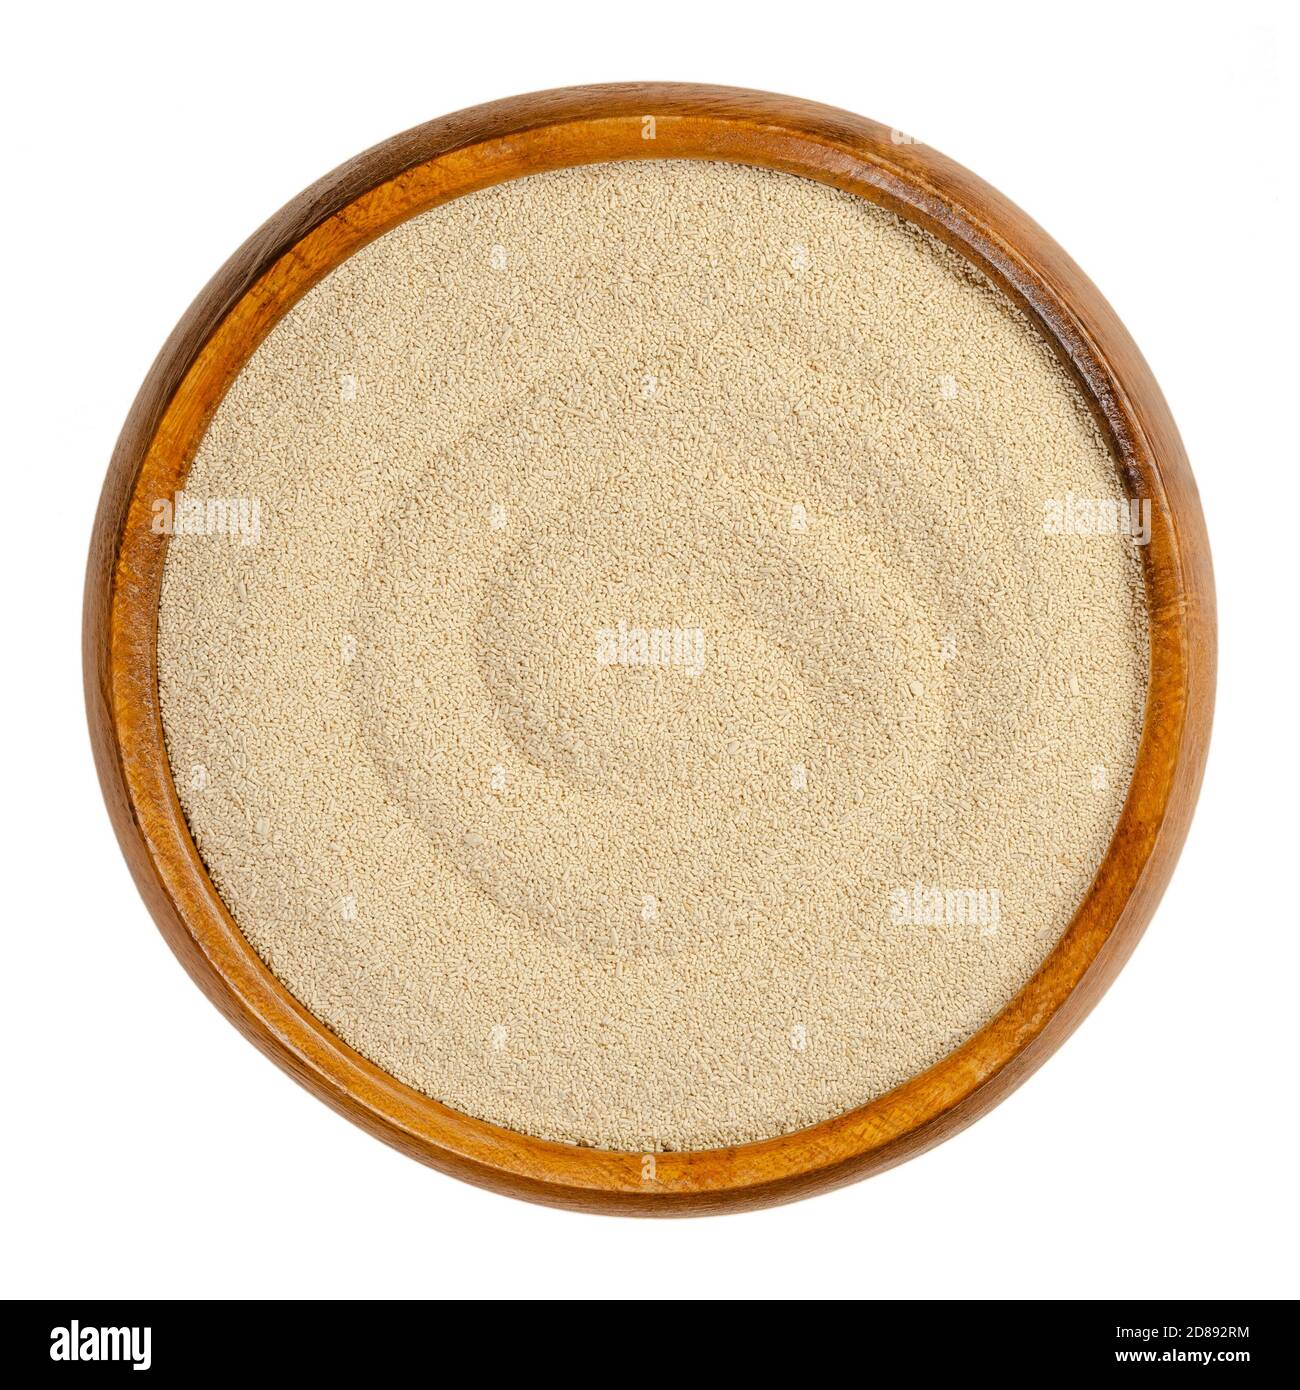 Dry yeast in a wooden bowl. Small oblong granules of active bakers yeast, commonly used in baking bread and bakery products. Close-up, from above. Stock Photo